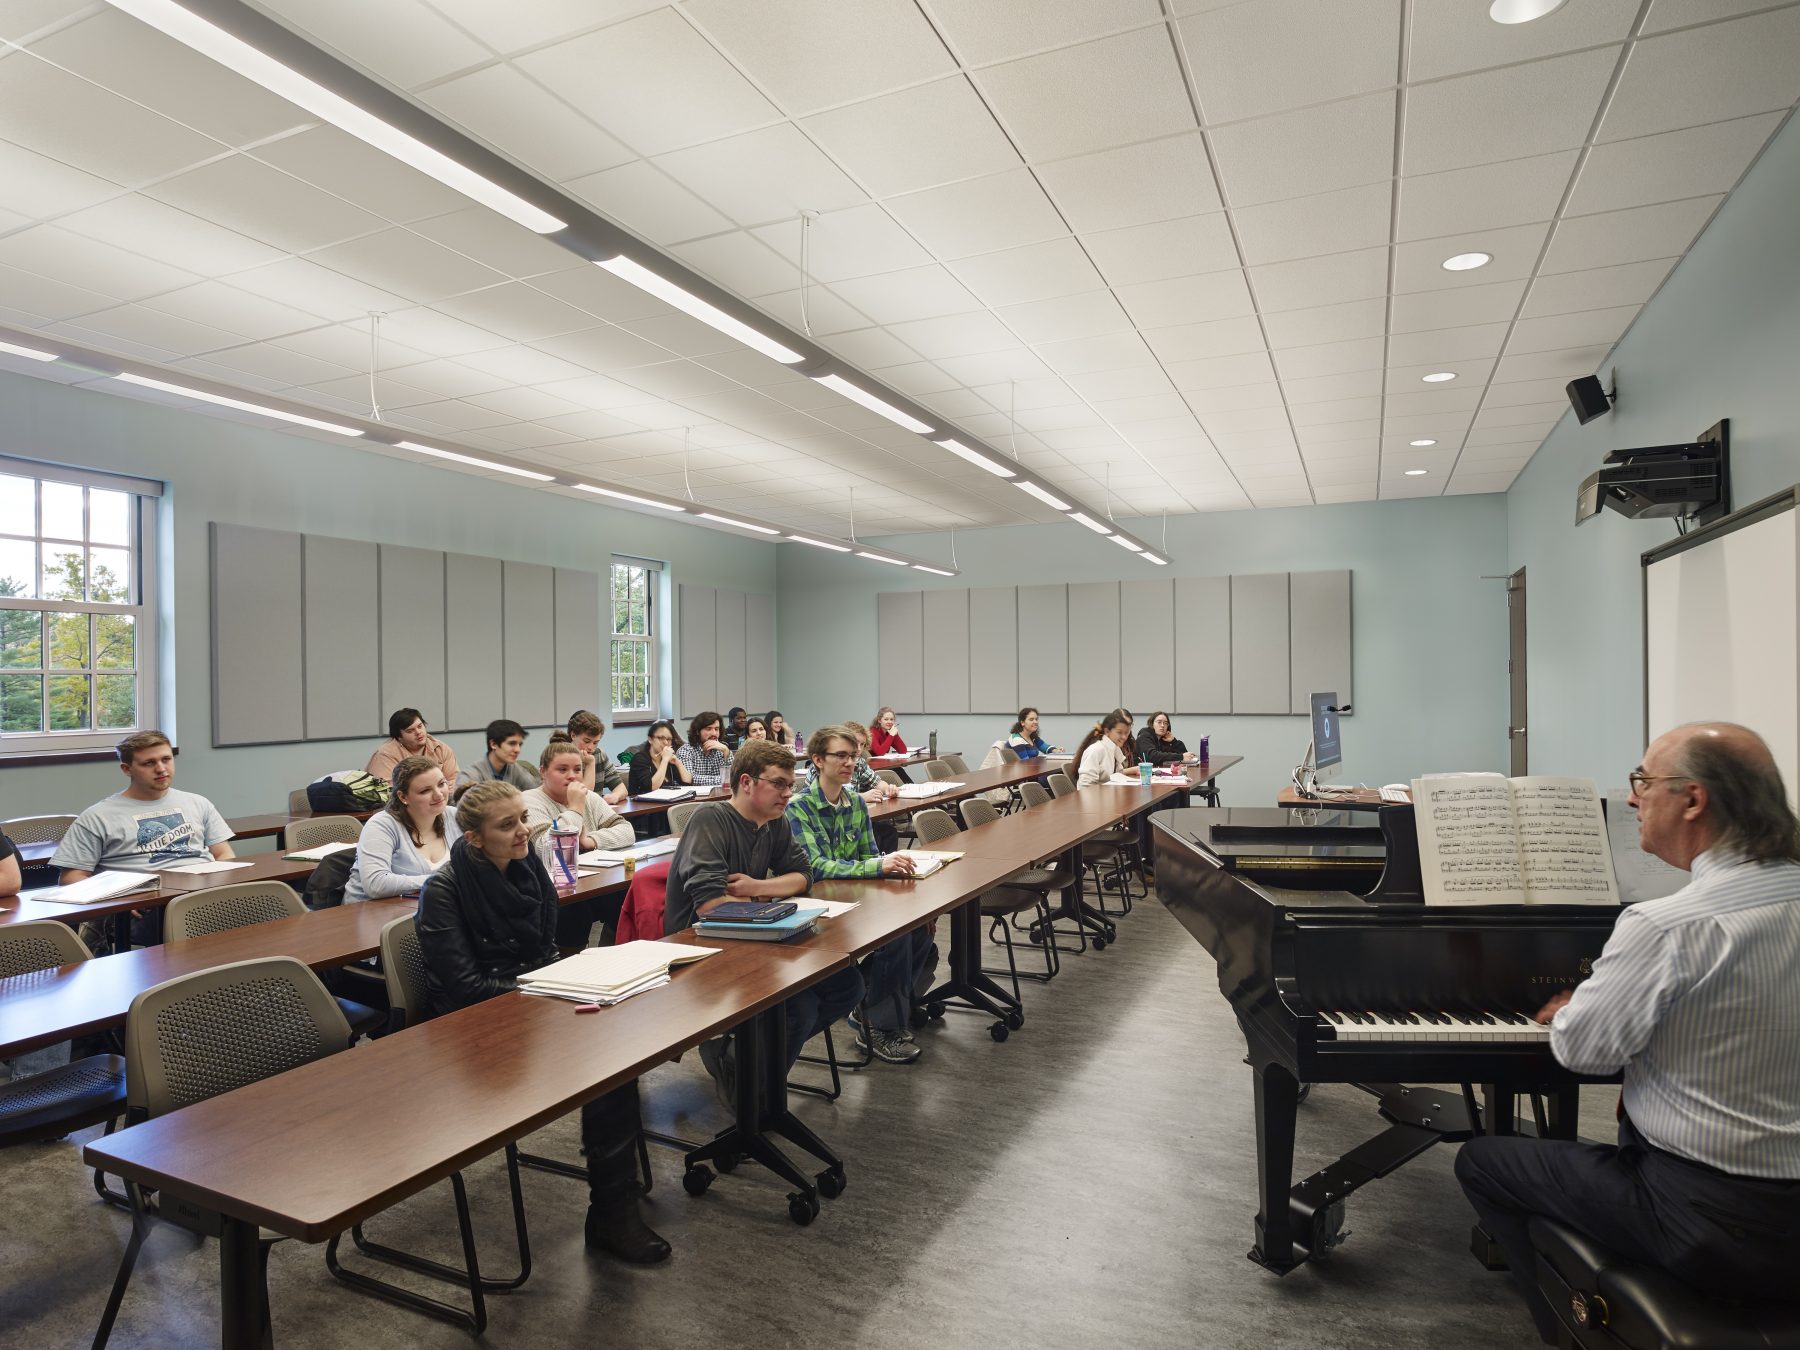 Westminster Choir College Band Classroom, the professor plays piano to the class